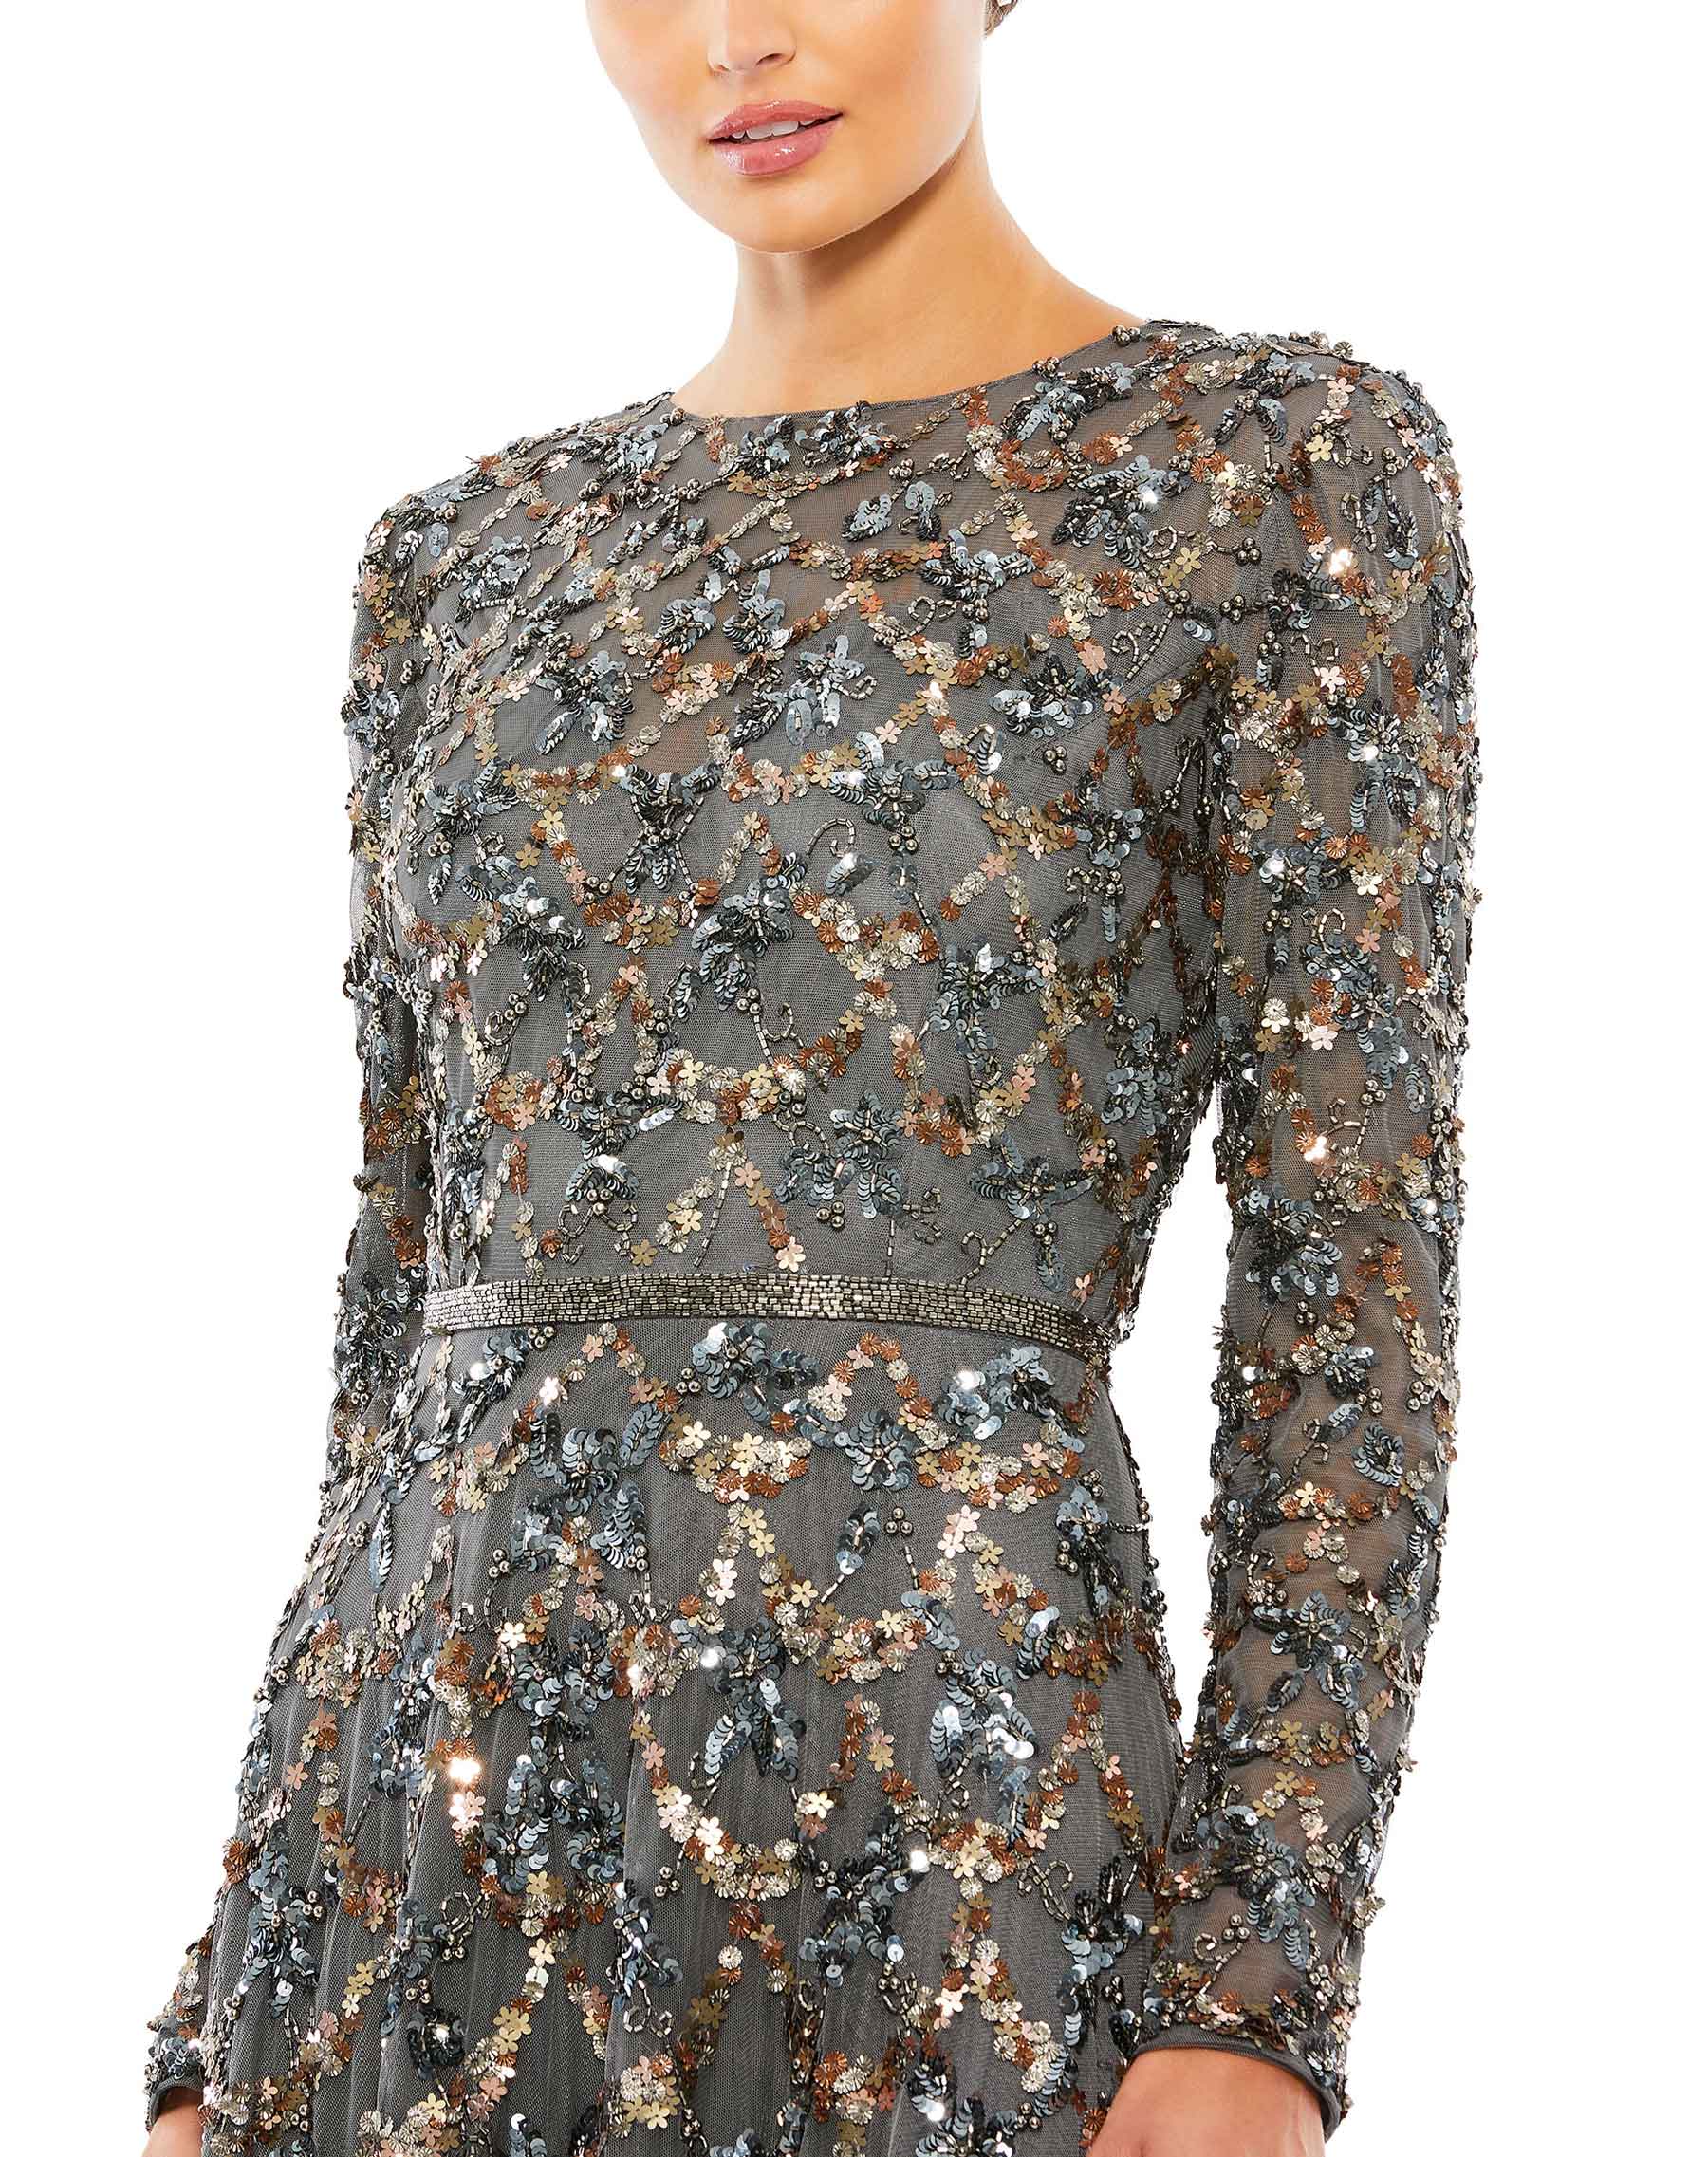 Embellished Illusion High Neck Long Sleeve A Line Gown